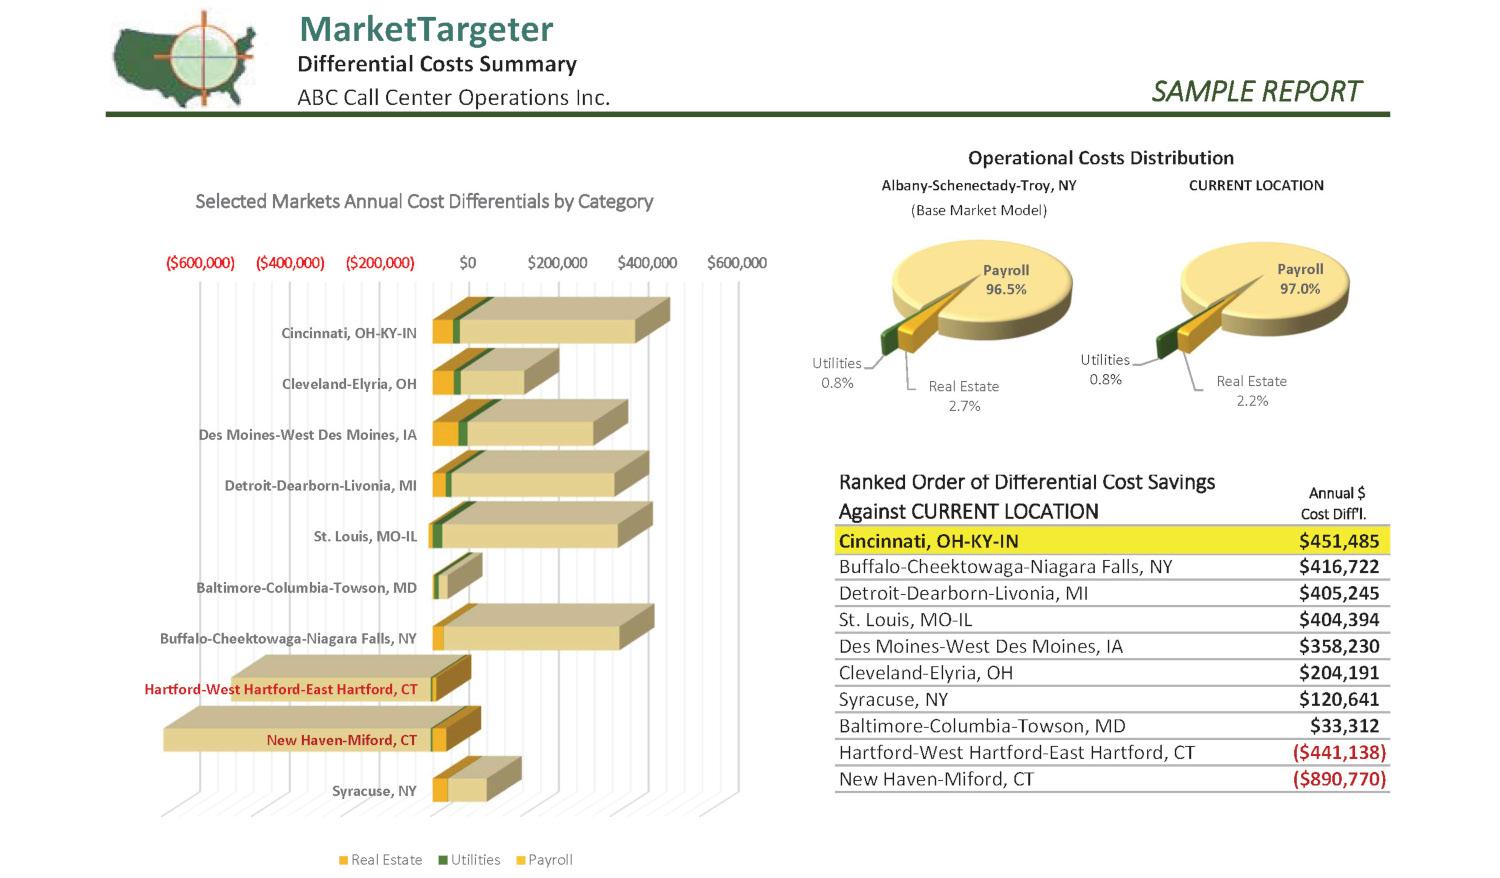 Sample page from MarketTargeter report